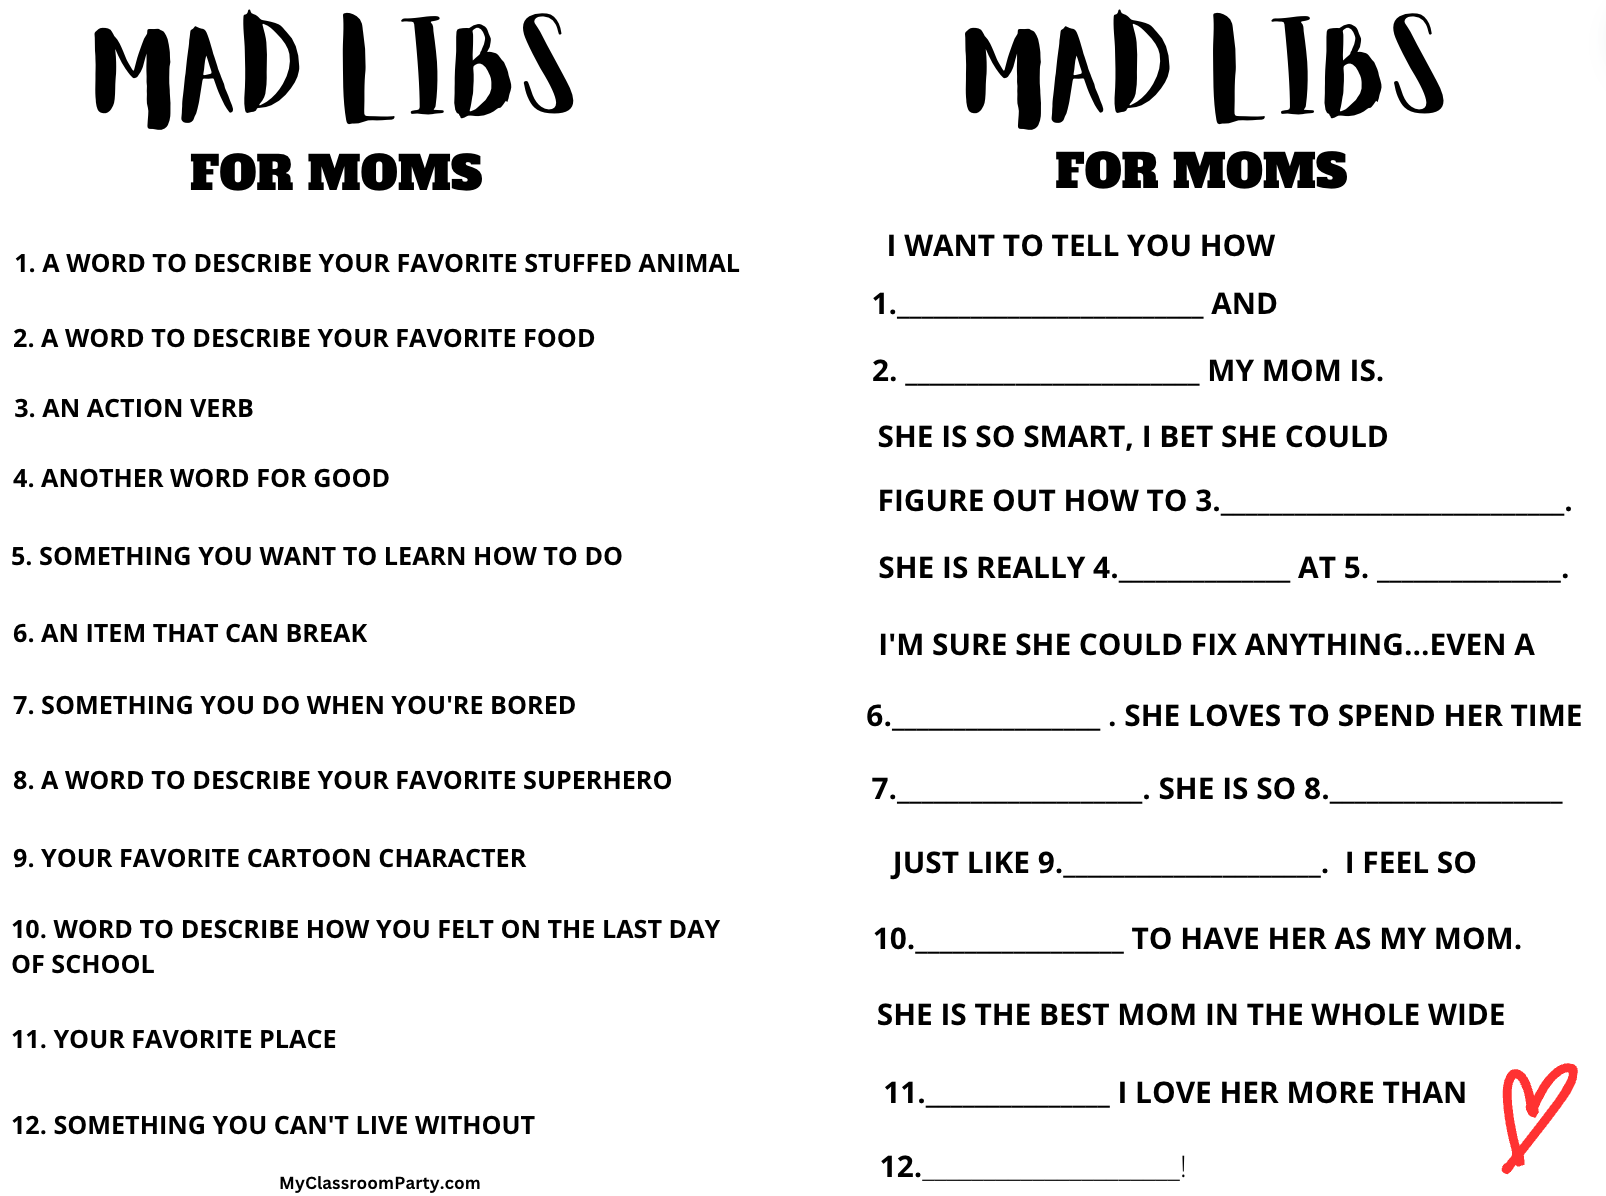 This is a fun and free printable activity for Mother's Day.